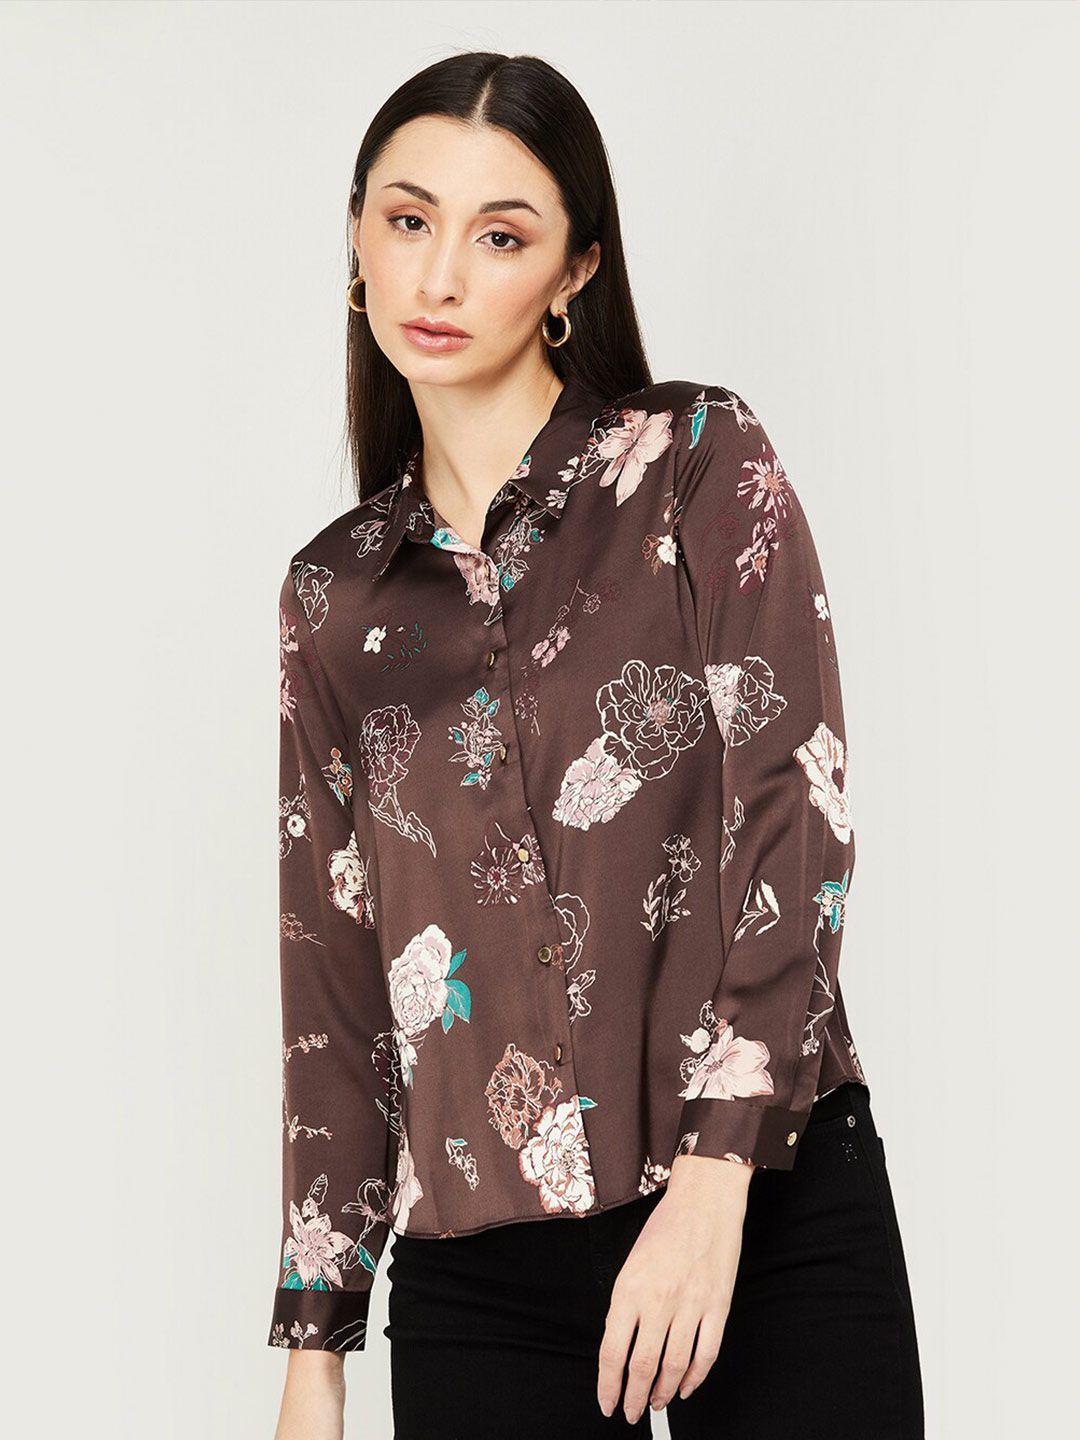 code by lifestyle floral printed shirt style top